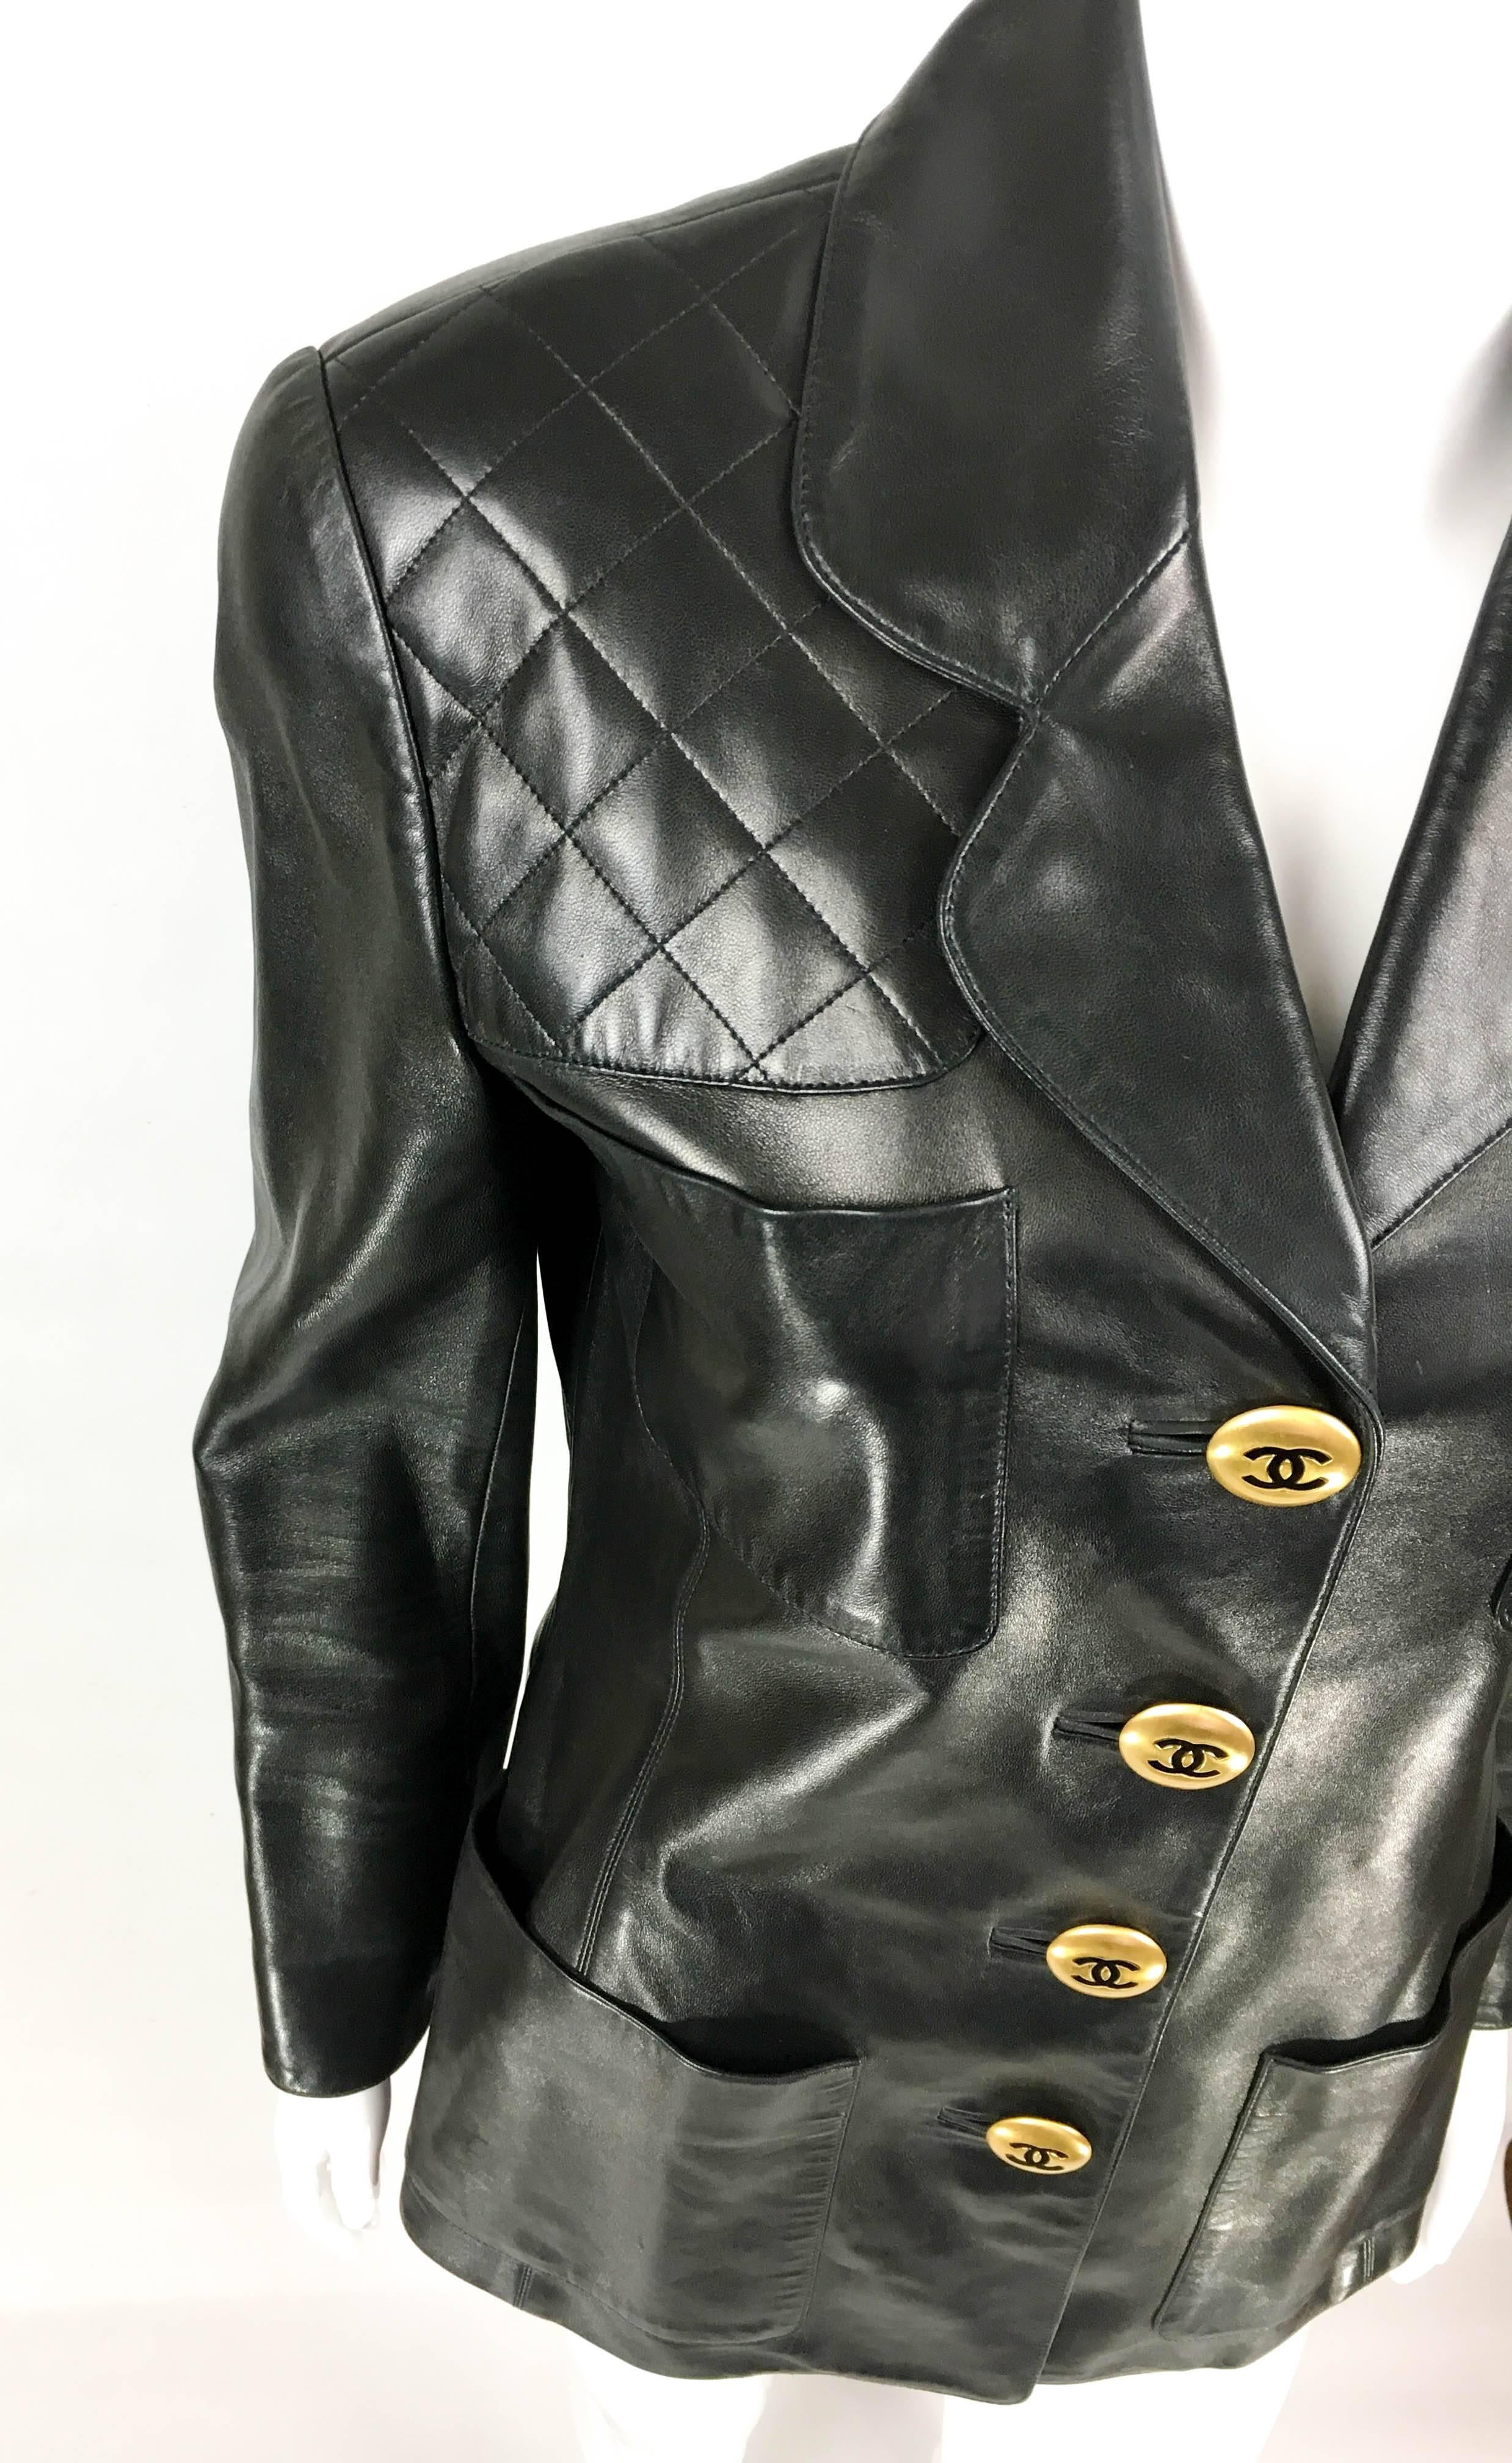 1992 Chanel Runway Look Black Leather Jacket With Quilted Shoulder In Excellent Condition In London, Chelsea